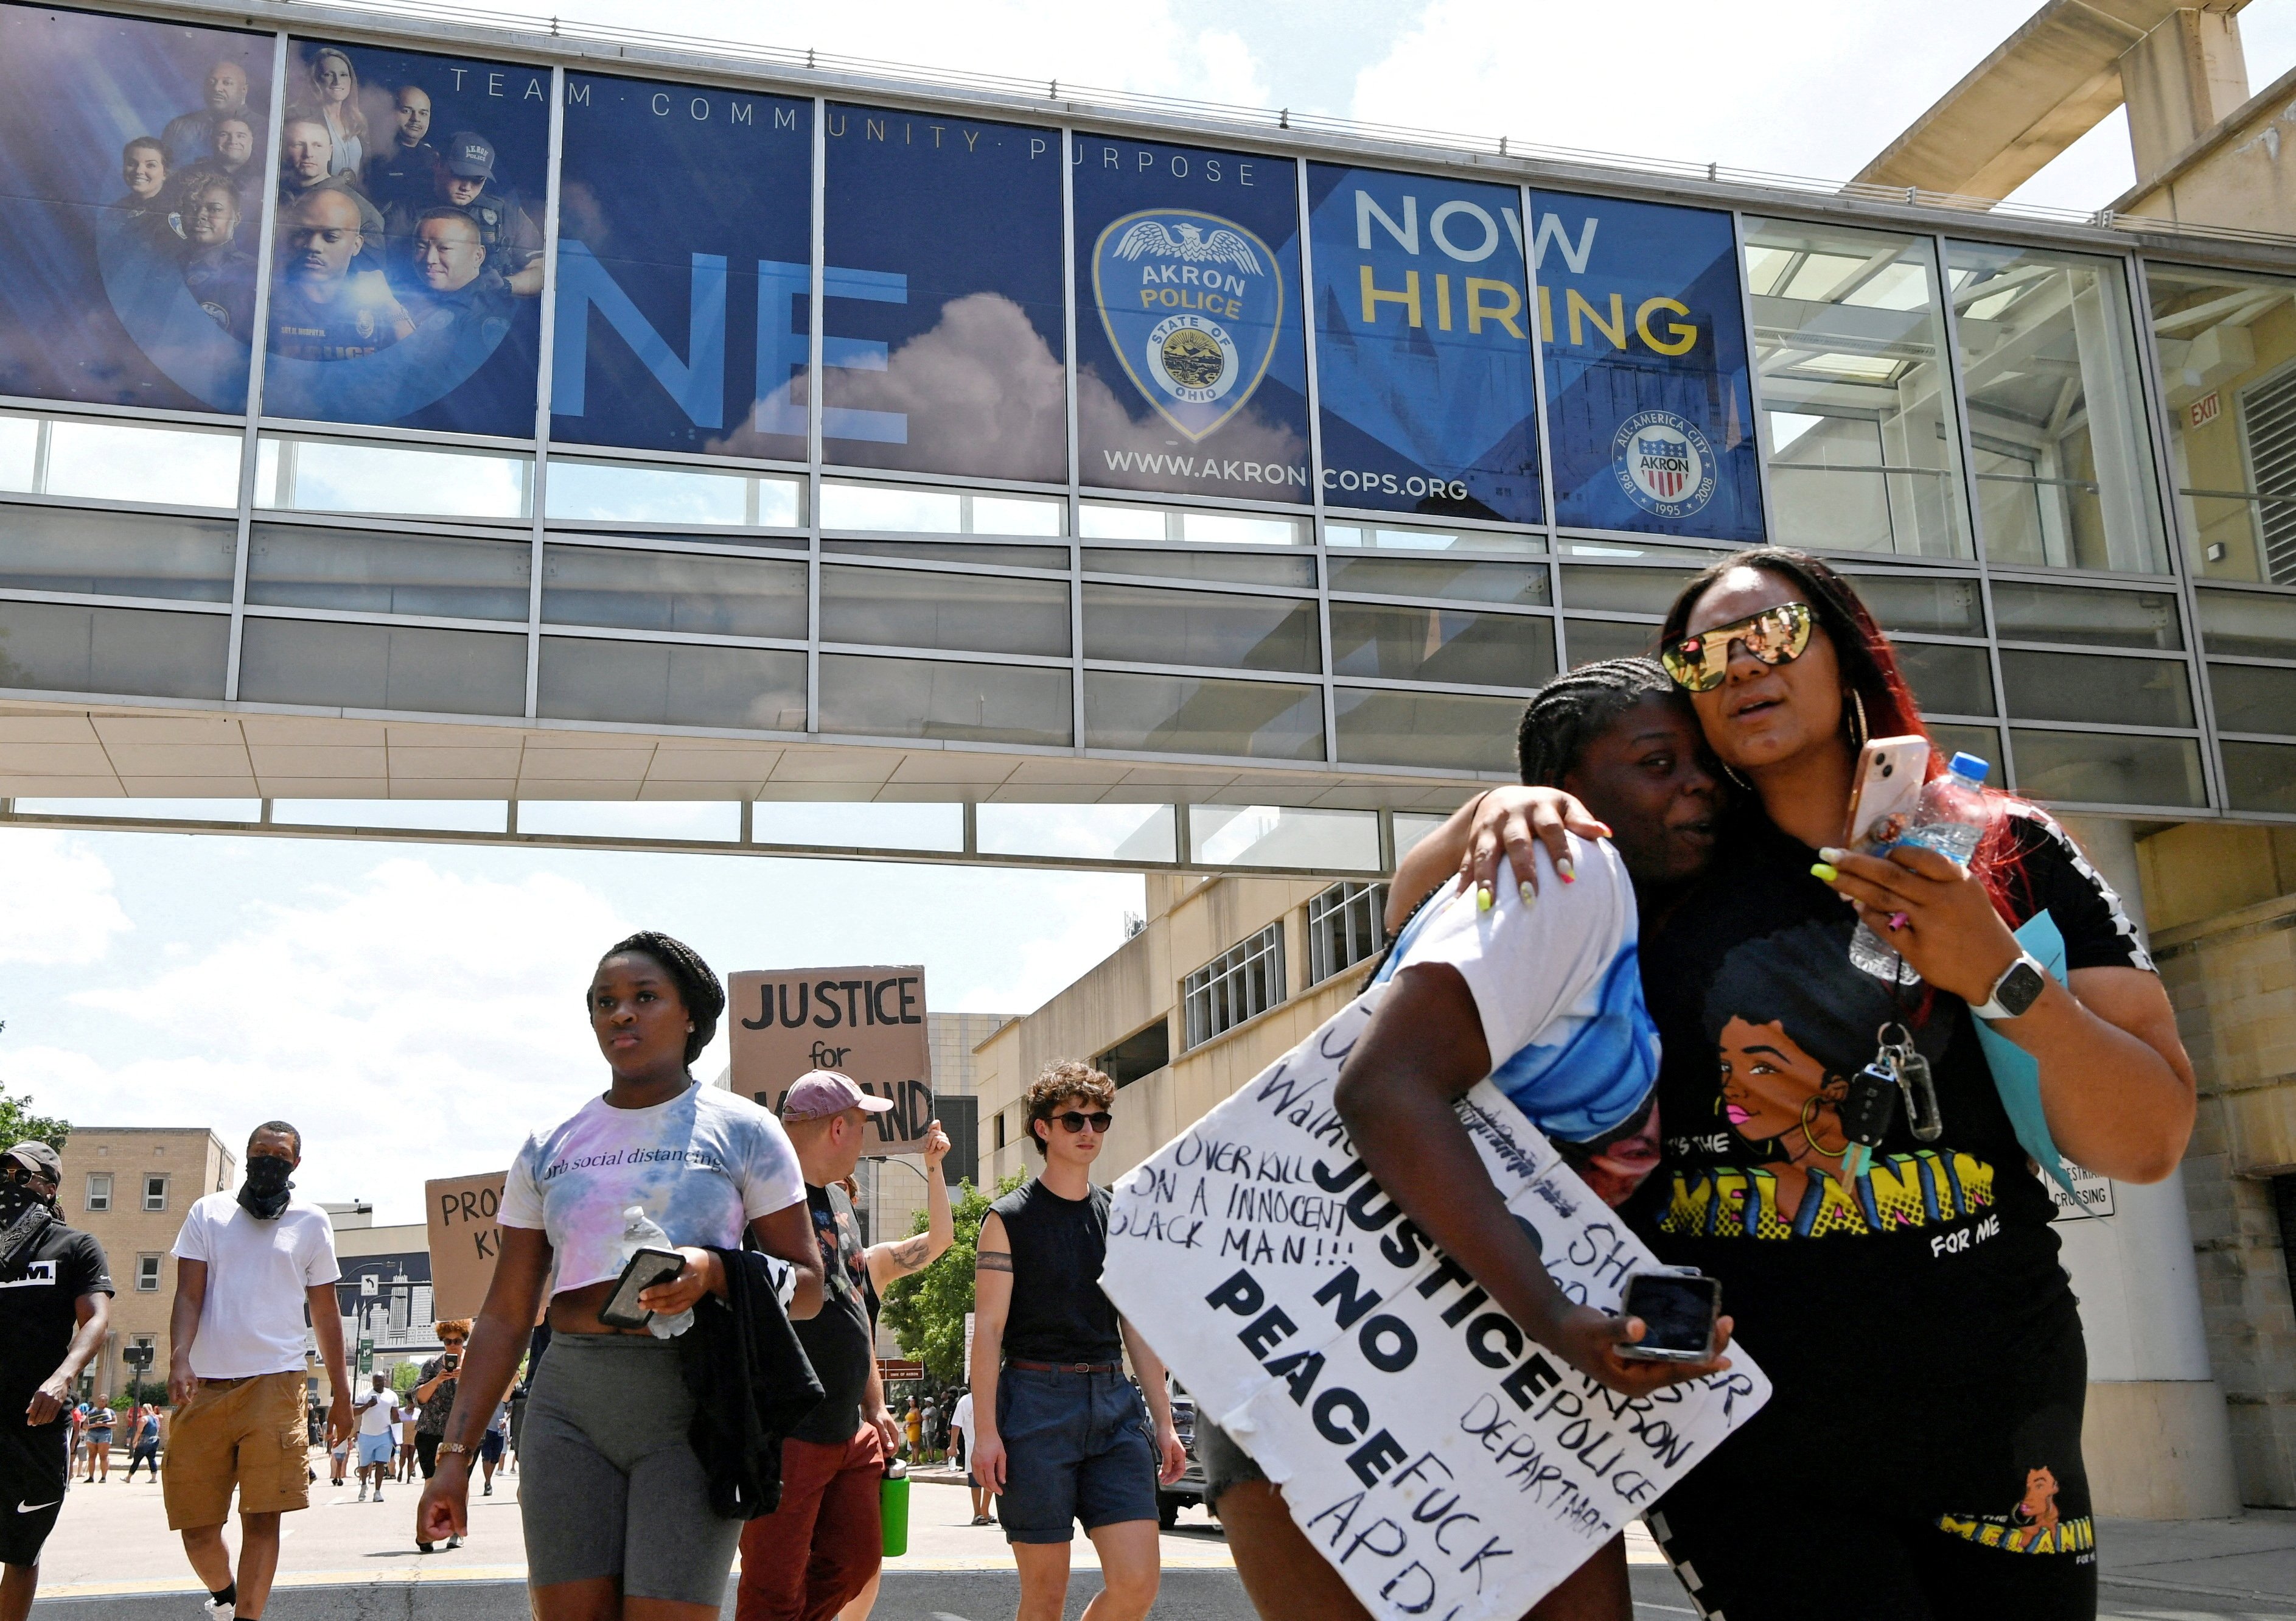 Demonstrators in Akron, Ohio, gather July 3 to protest the June 27 police shooting death of Jayland Walker. (CNS/Reuters/Gaelen Morse)